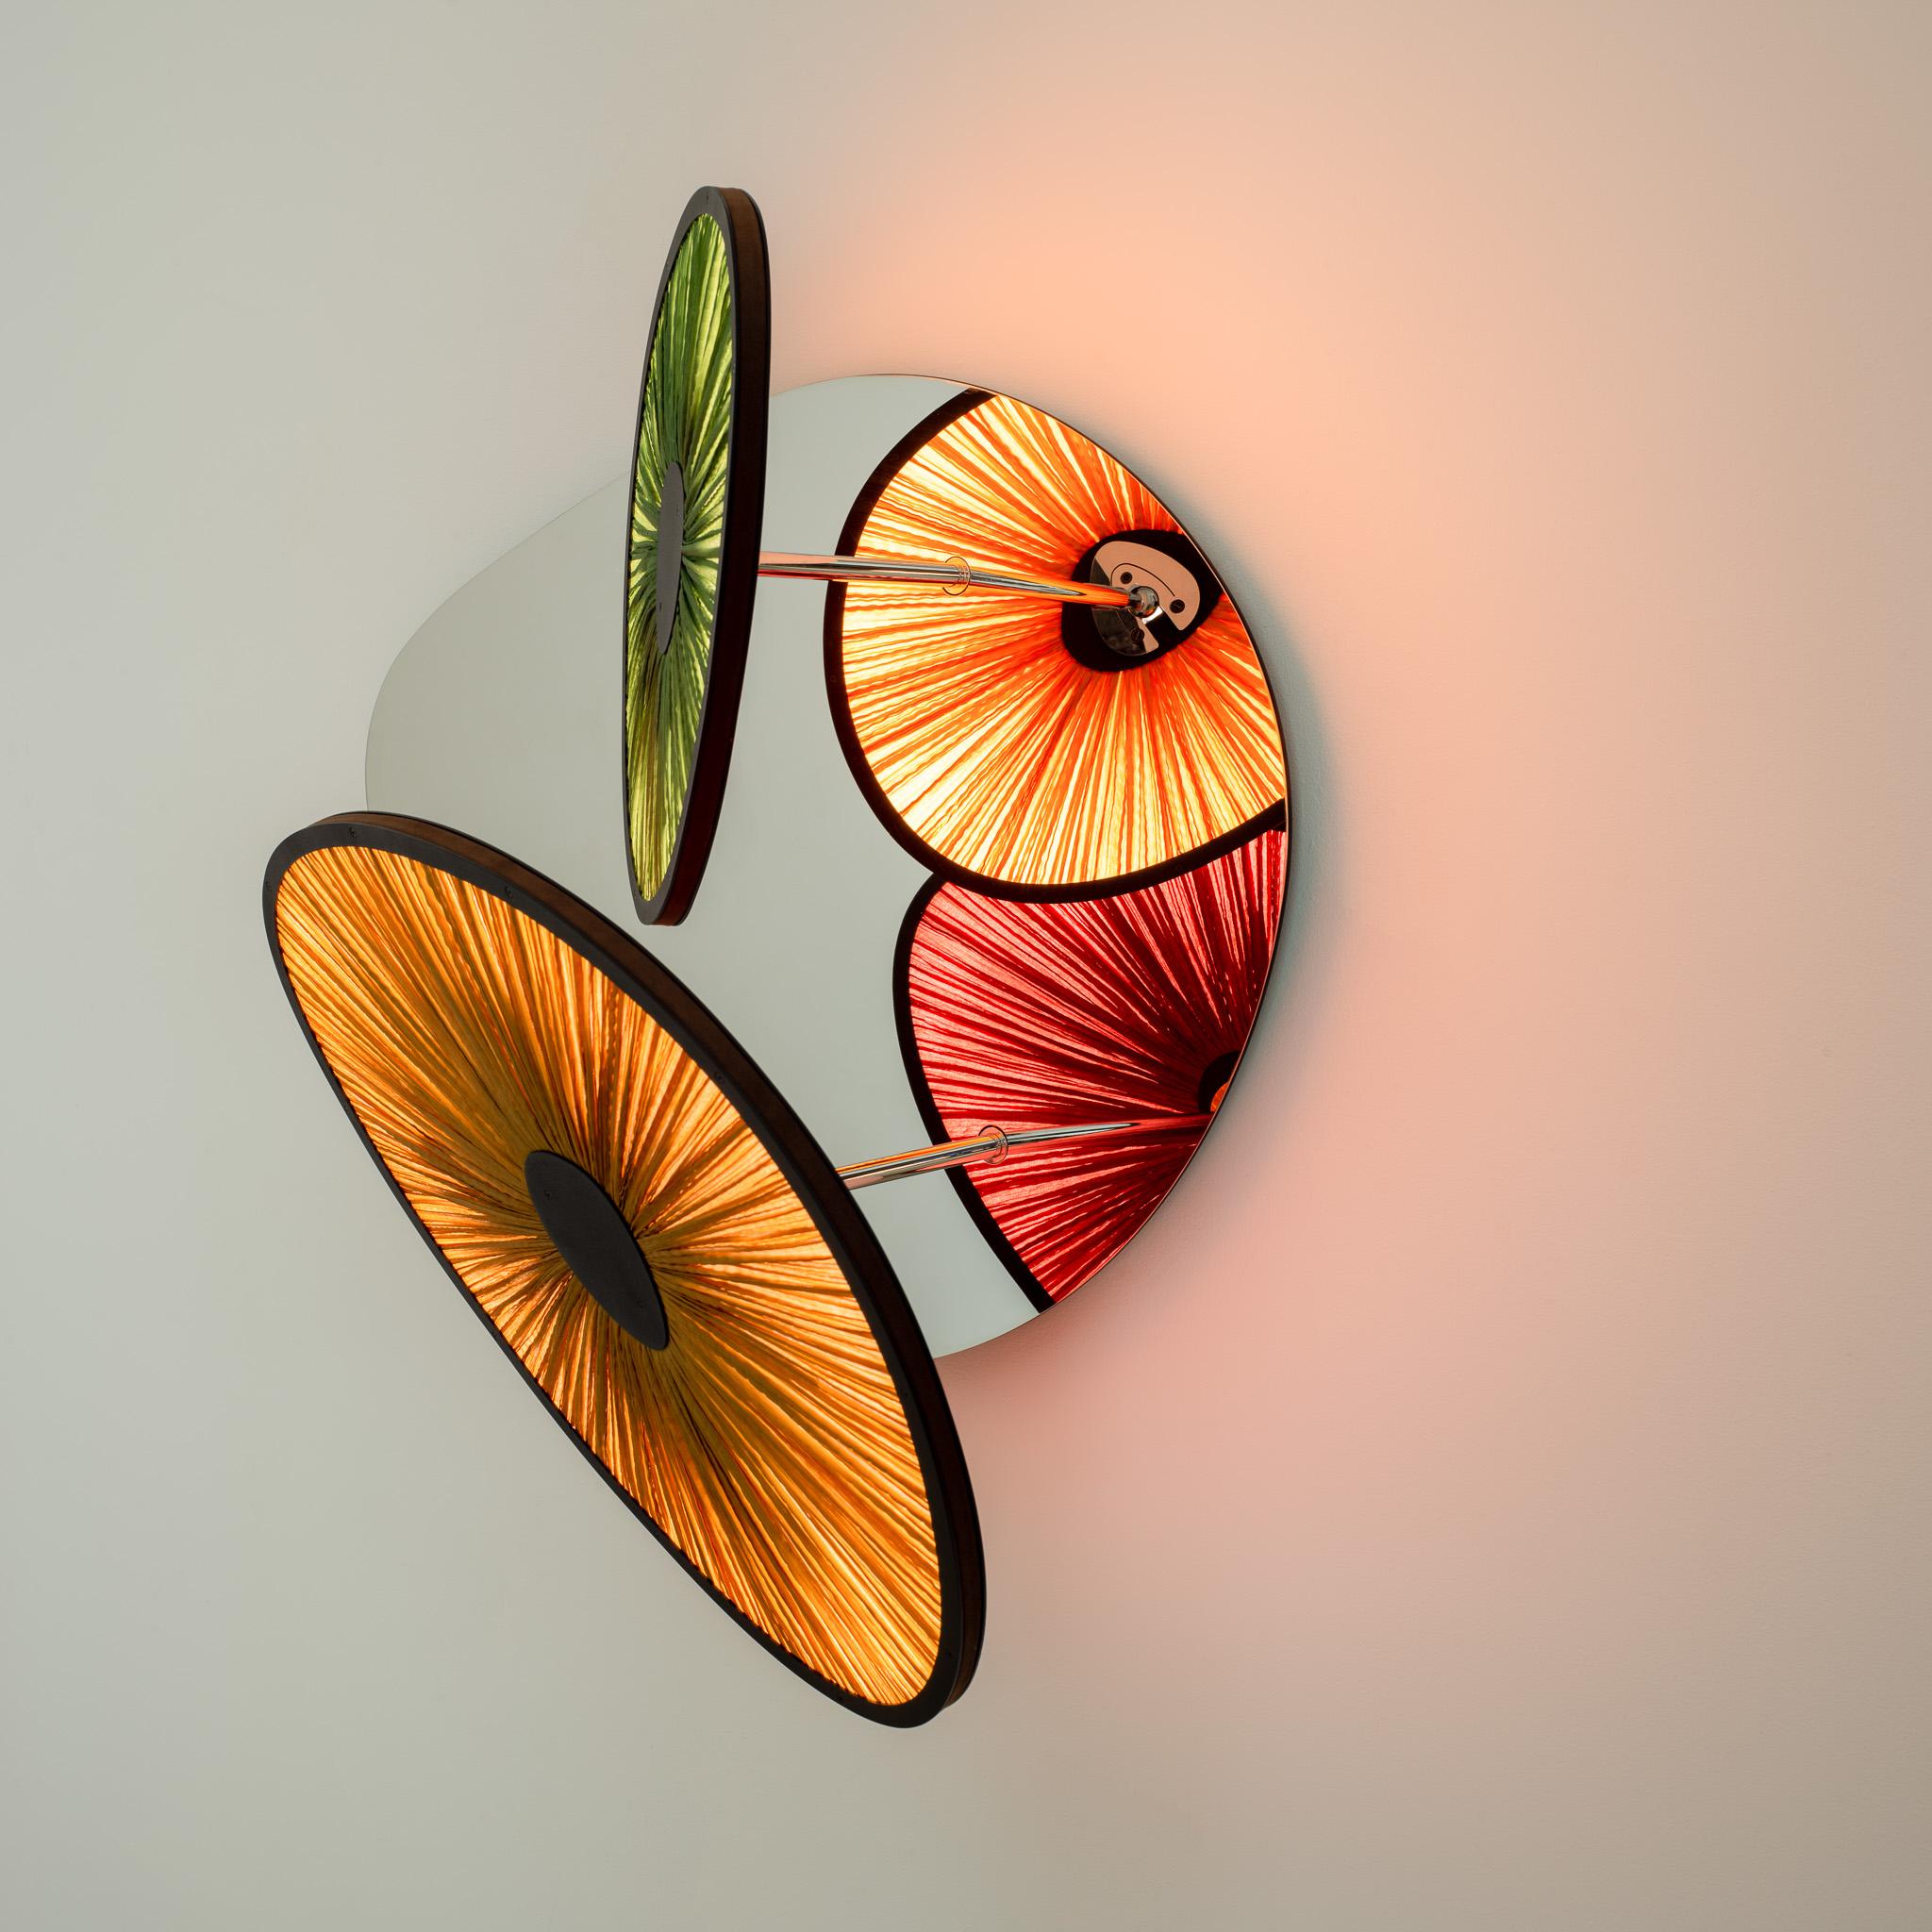 The Lake Doiran Mirror Wall Light (2 Lights) is a unique and innovative design by Albi Serfaty. This lamp features the studio's latest technology and explores the play of light and color with its multi-colored silk shades that can move individually